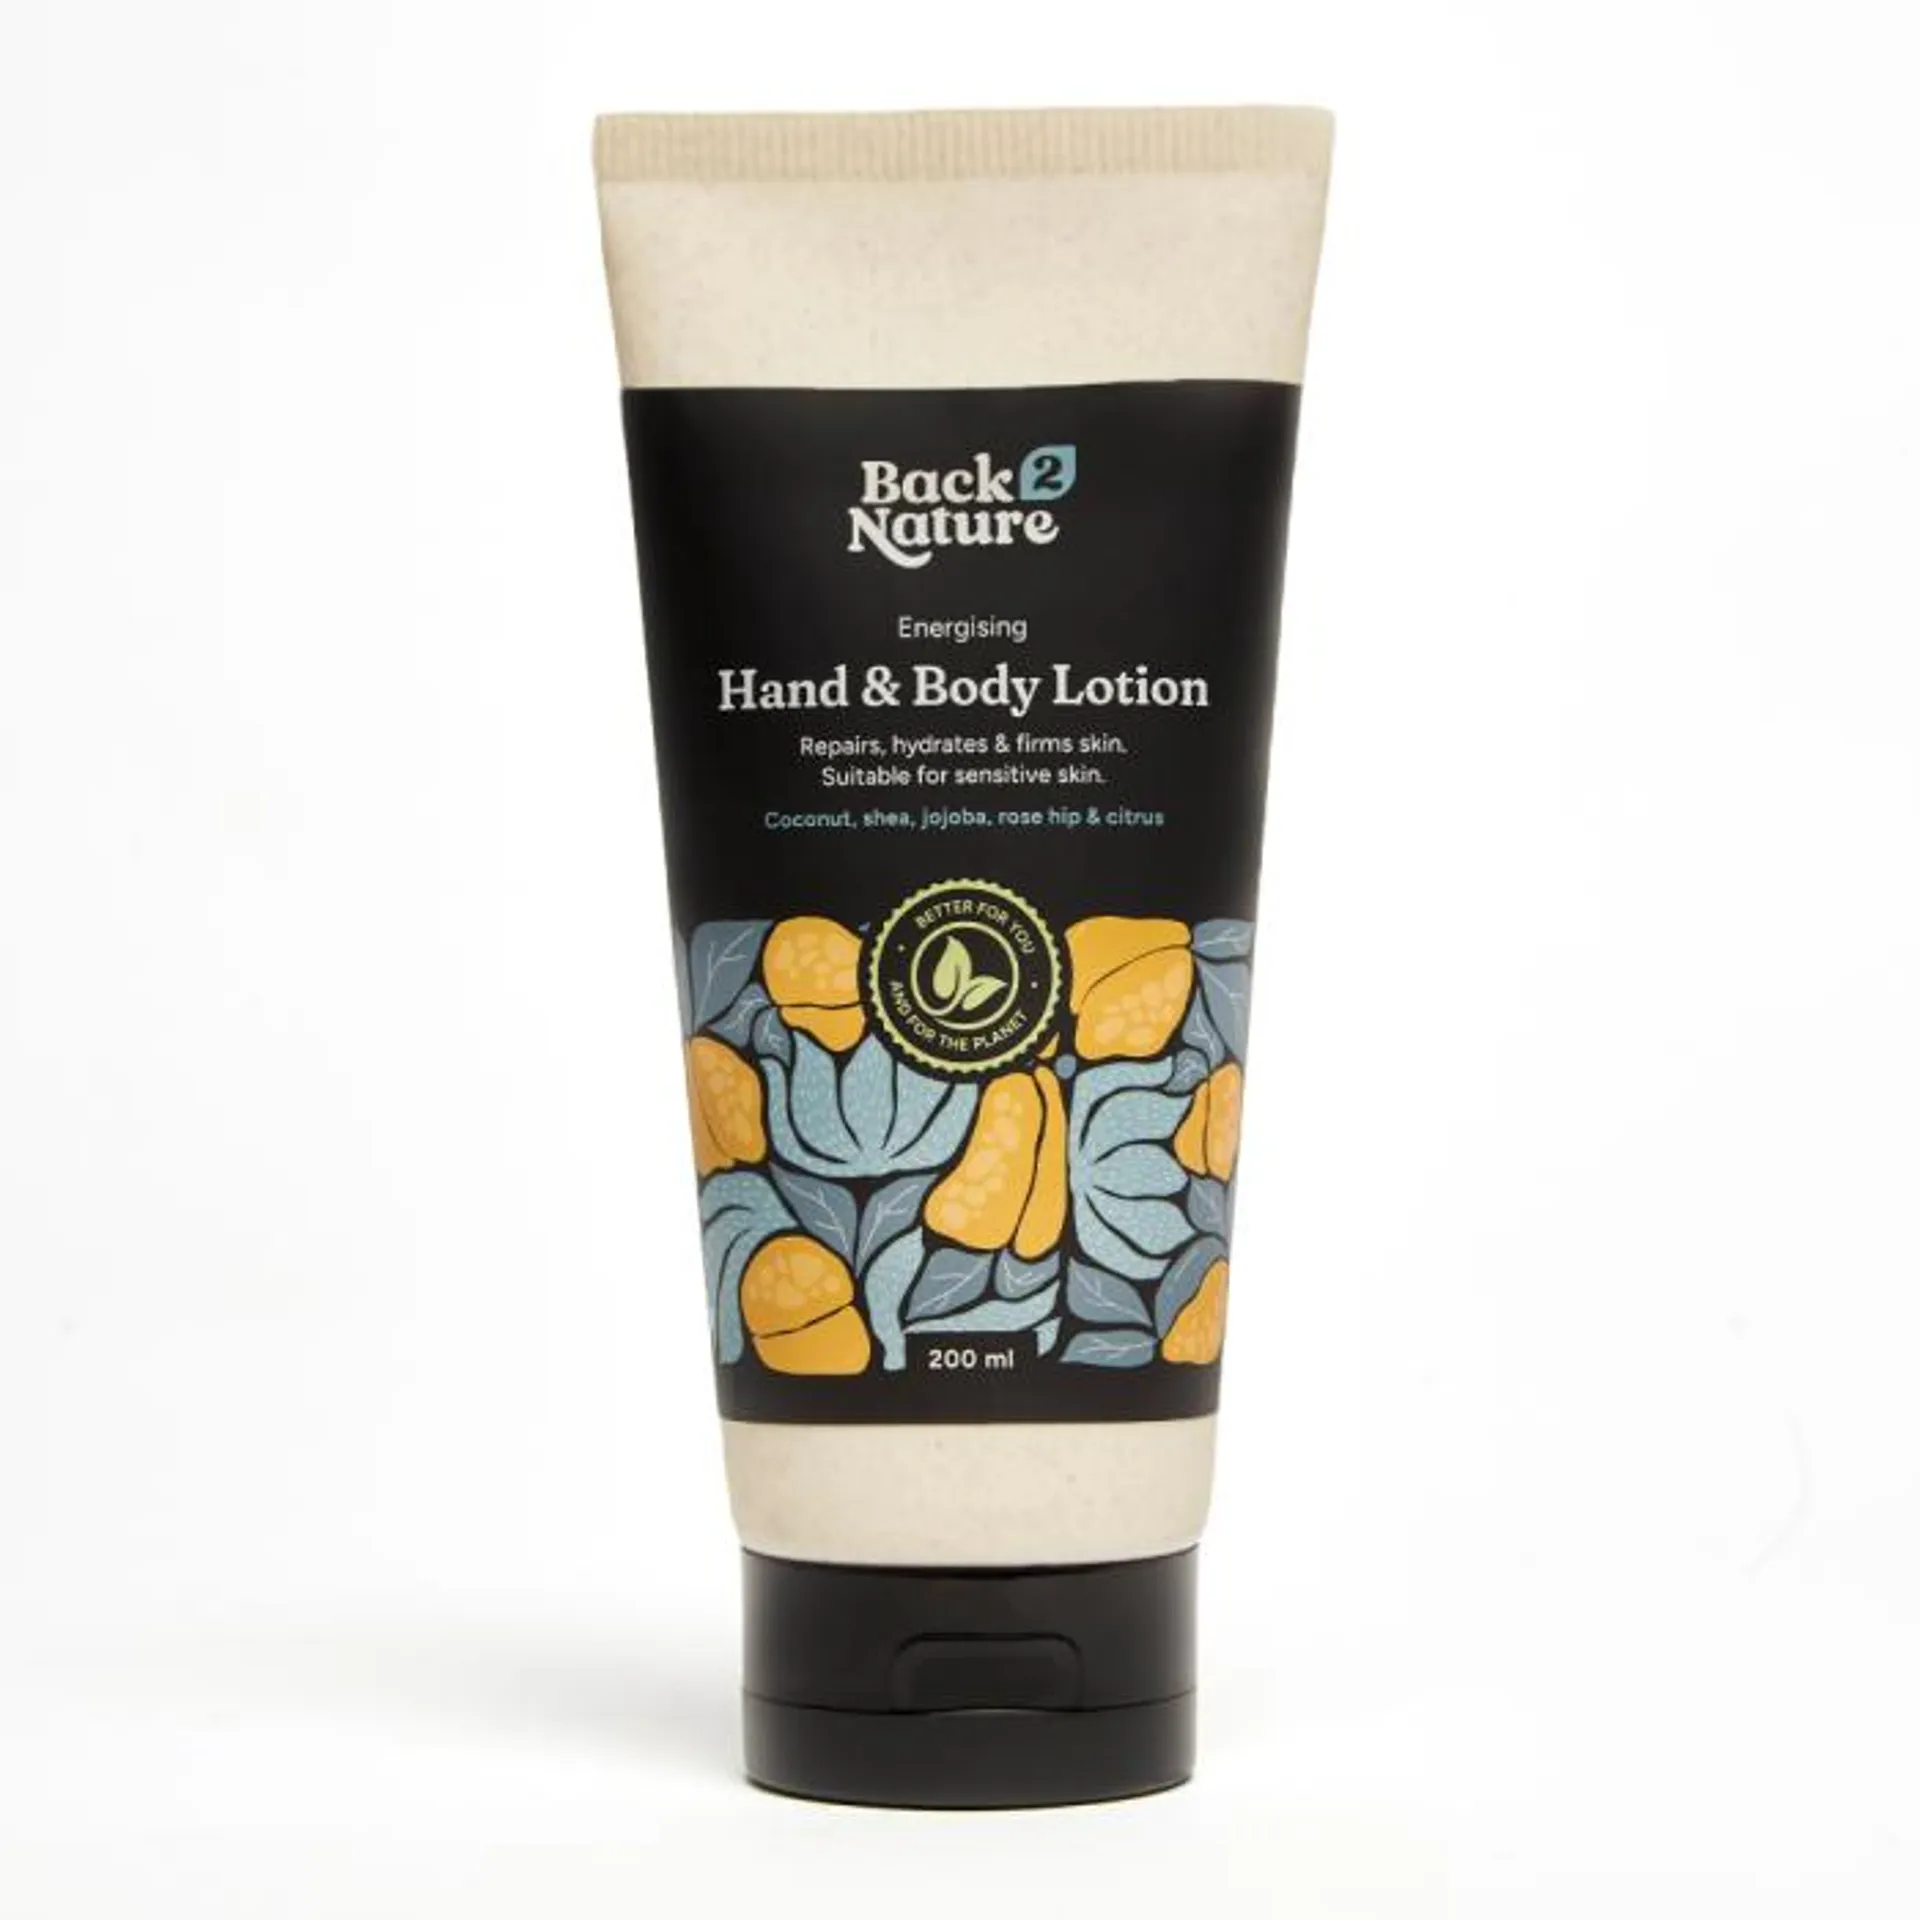 Back 2 Nature - Energising Hand & Body Lotion 200ml